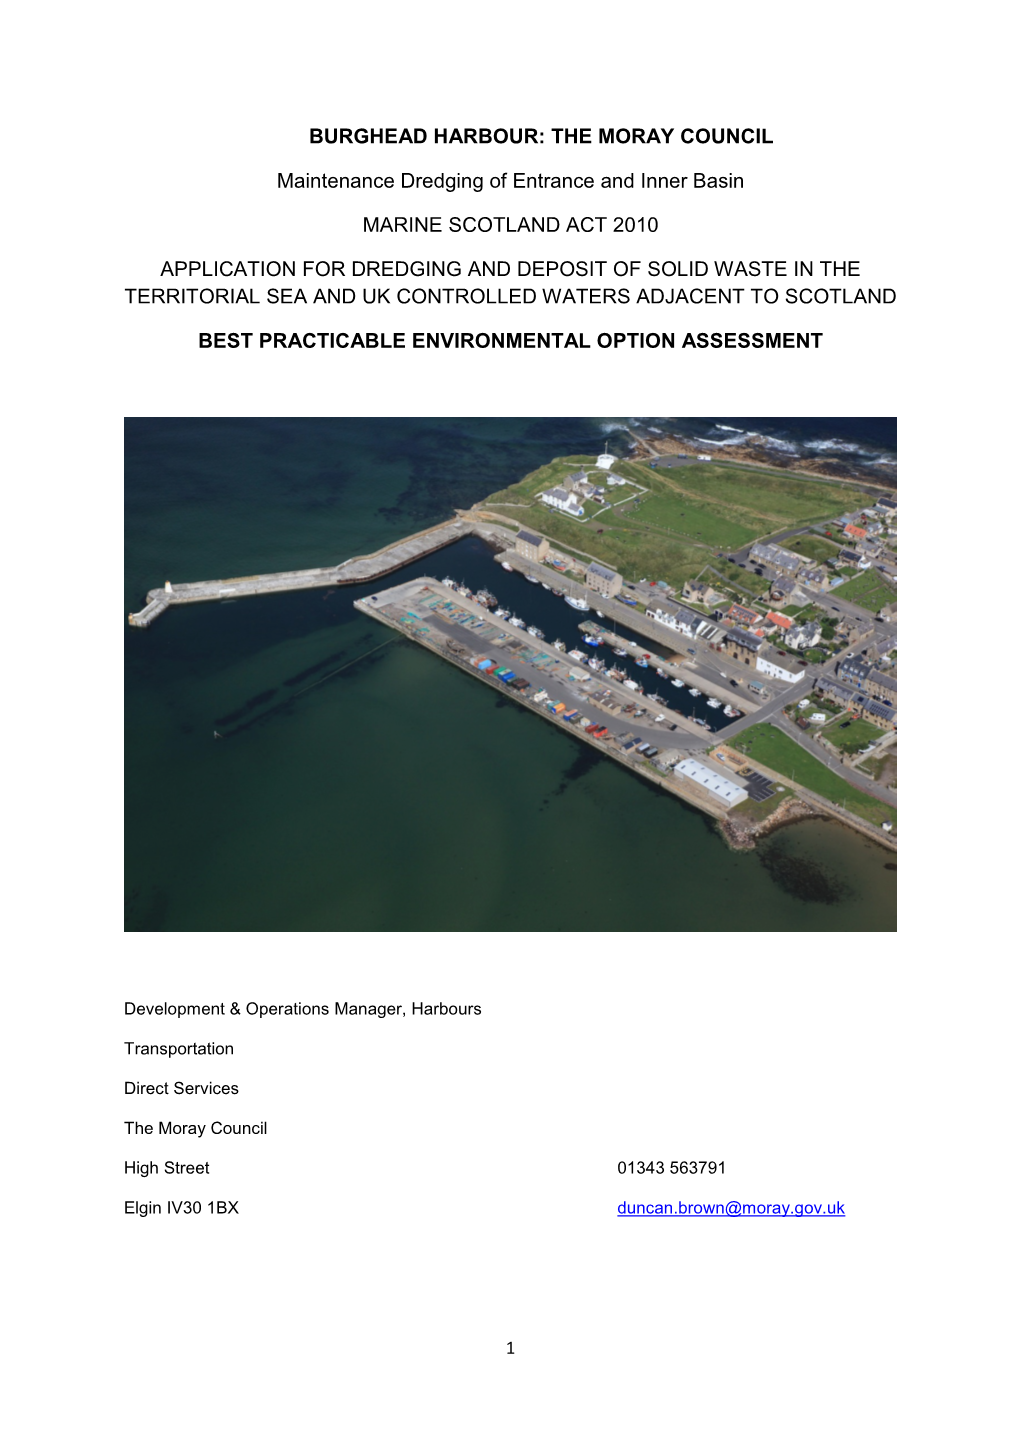 Burghead Harbour: the Moray Council